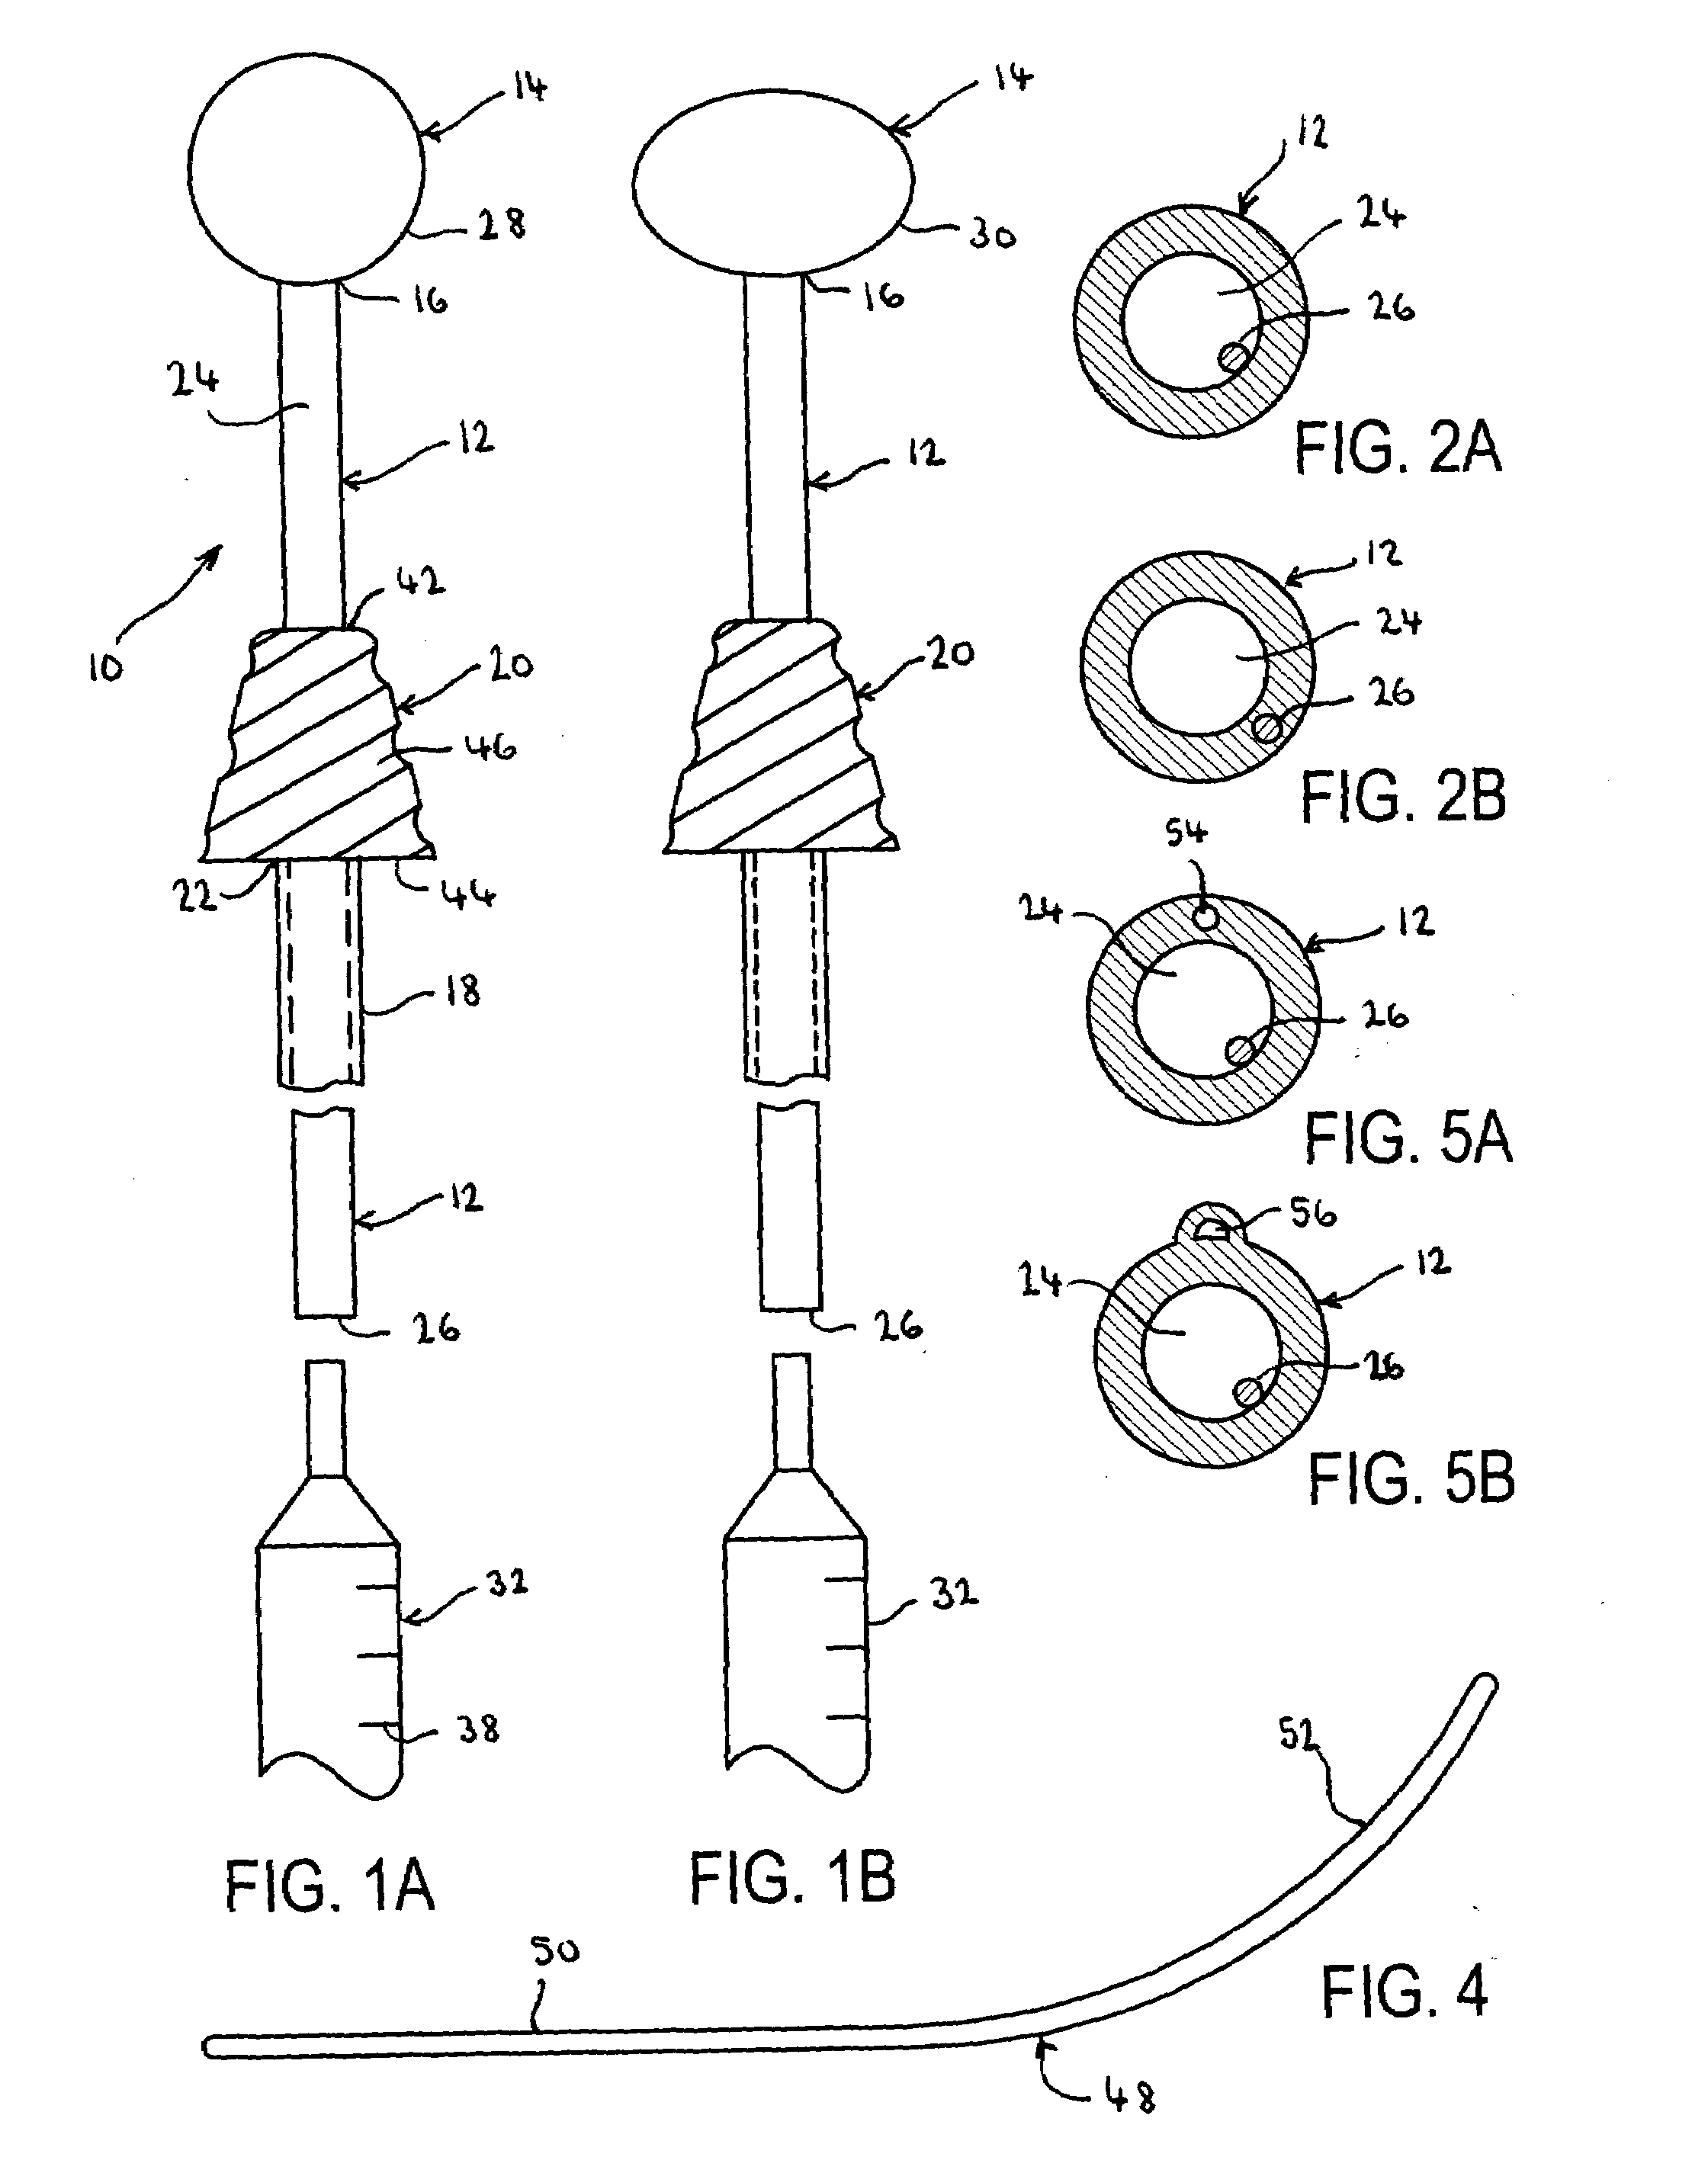 Apparatus for cervical manipulation and methods of use